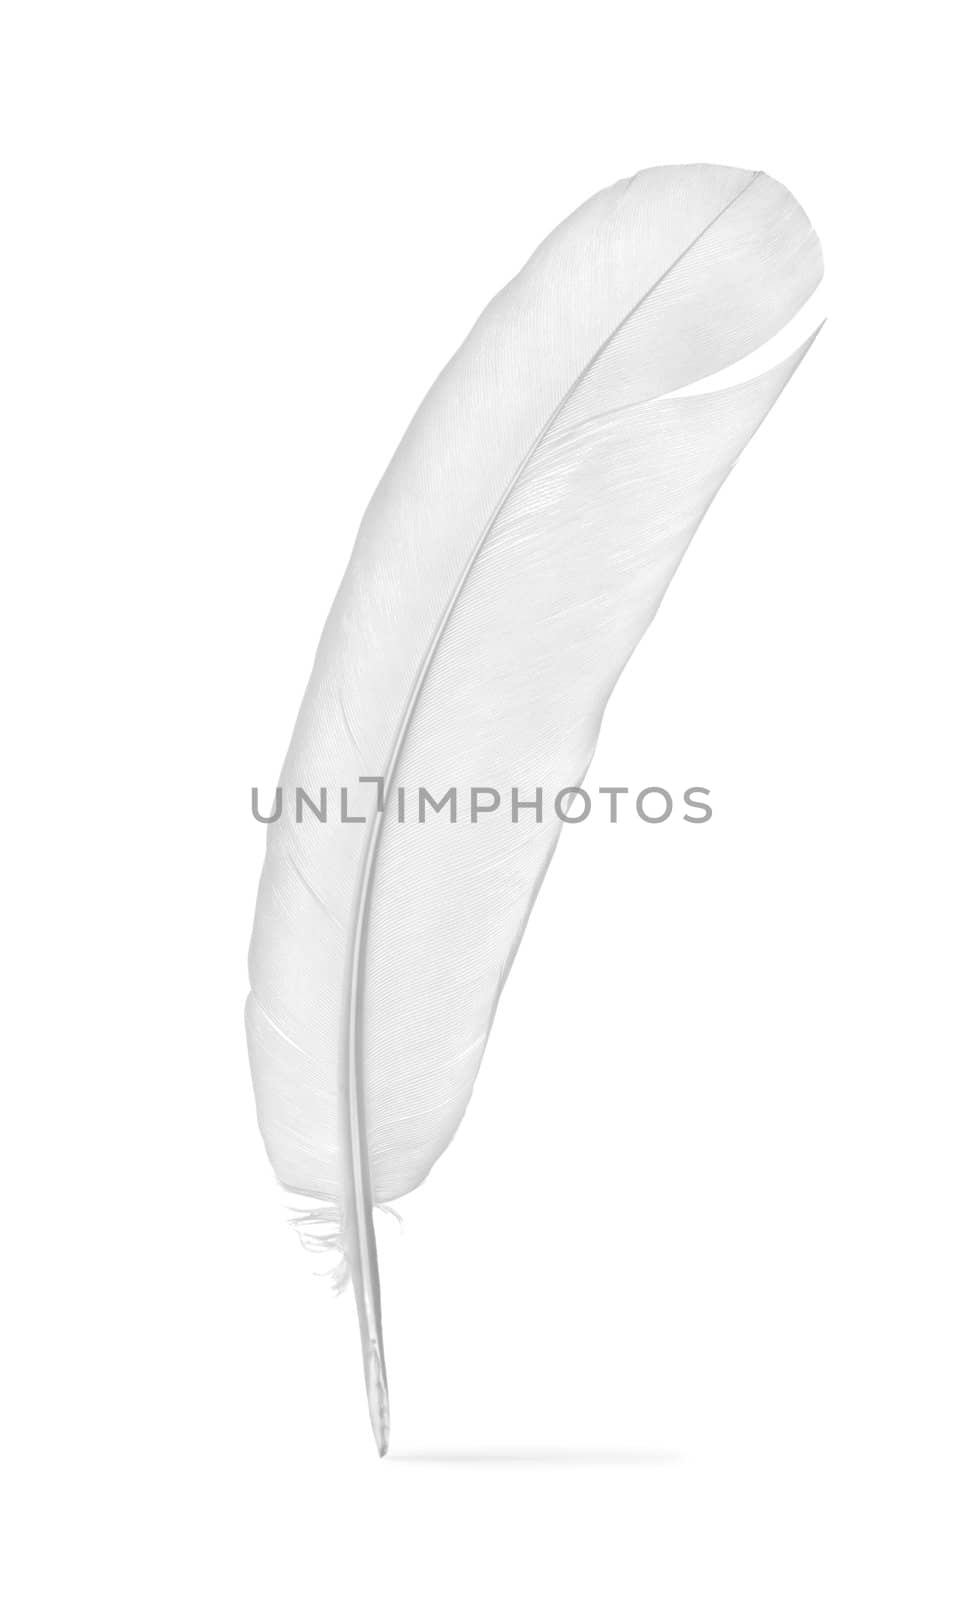 Feather of a pigeon by Givaga